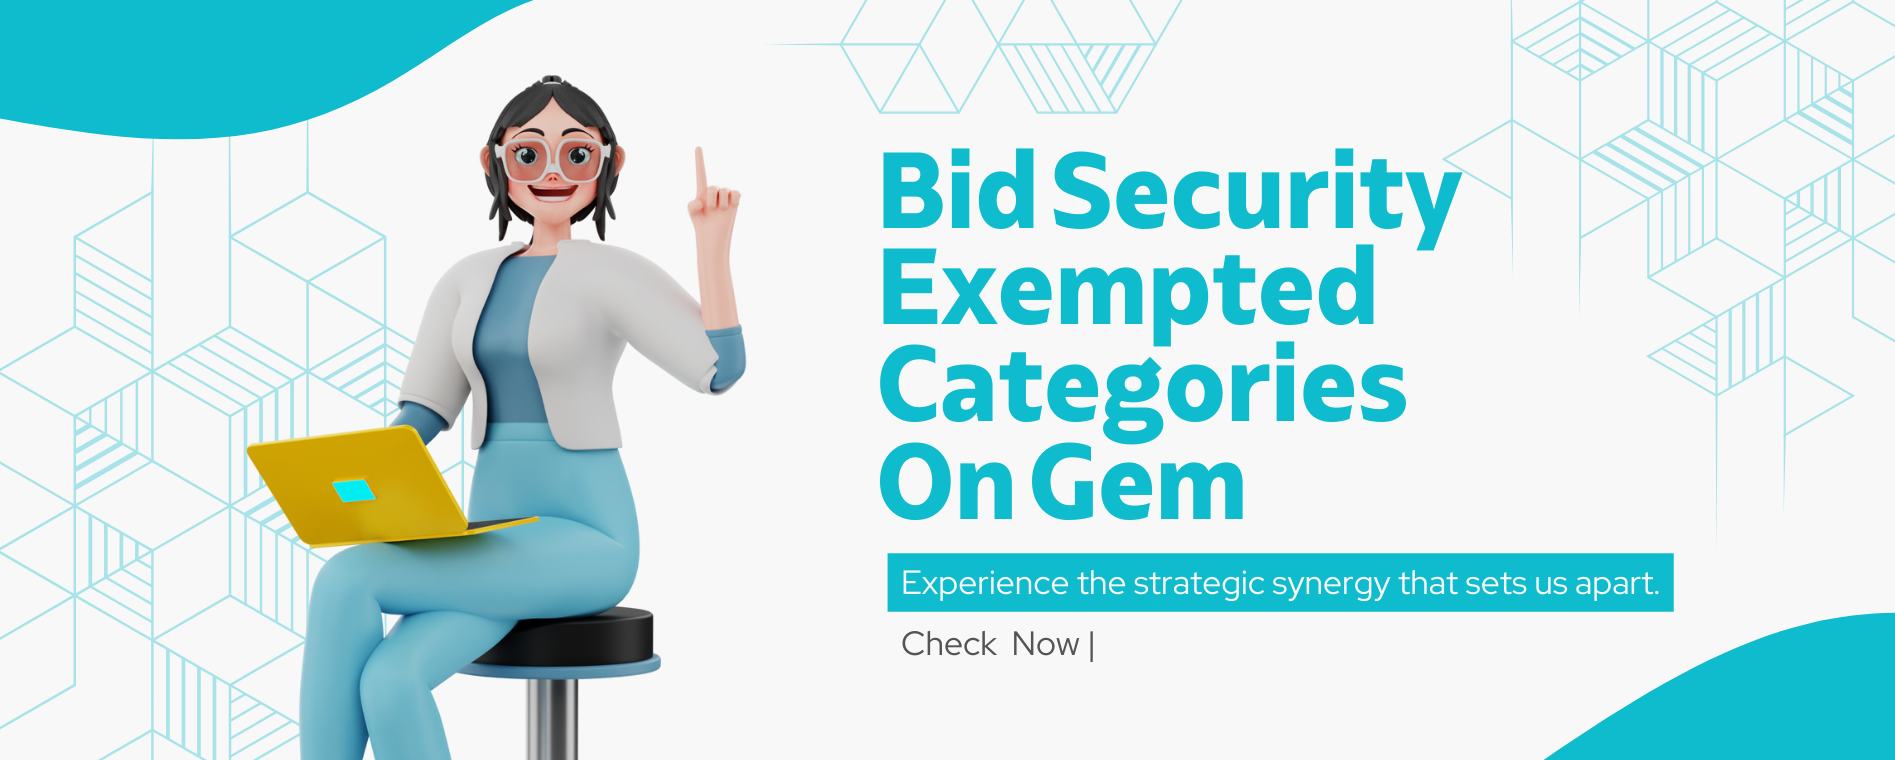 Select Bid Security Exempted Categories On Gem Bid Security Exempted Categories On Gem